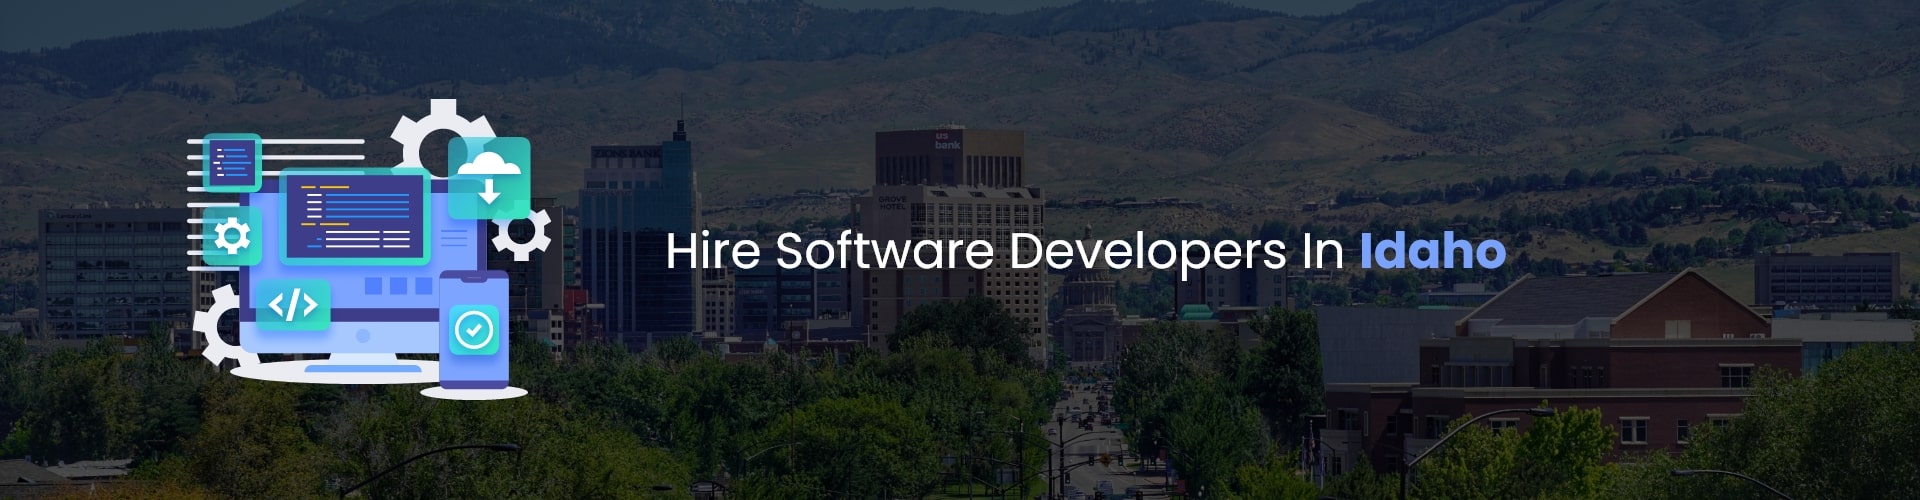 hire software developers in idaho